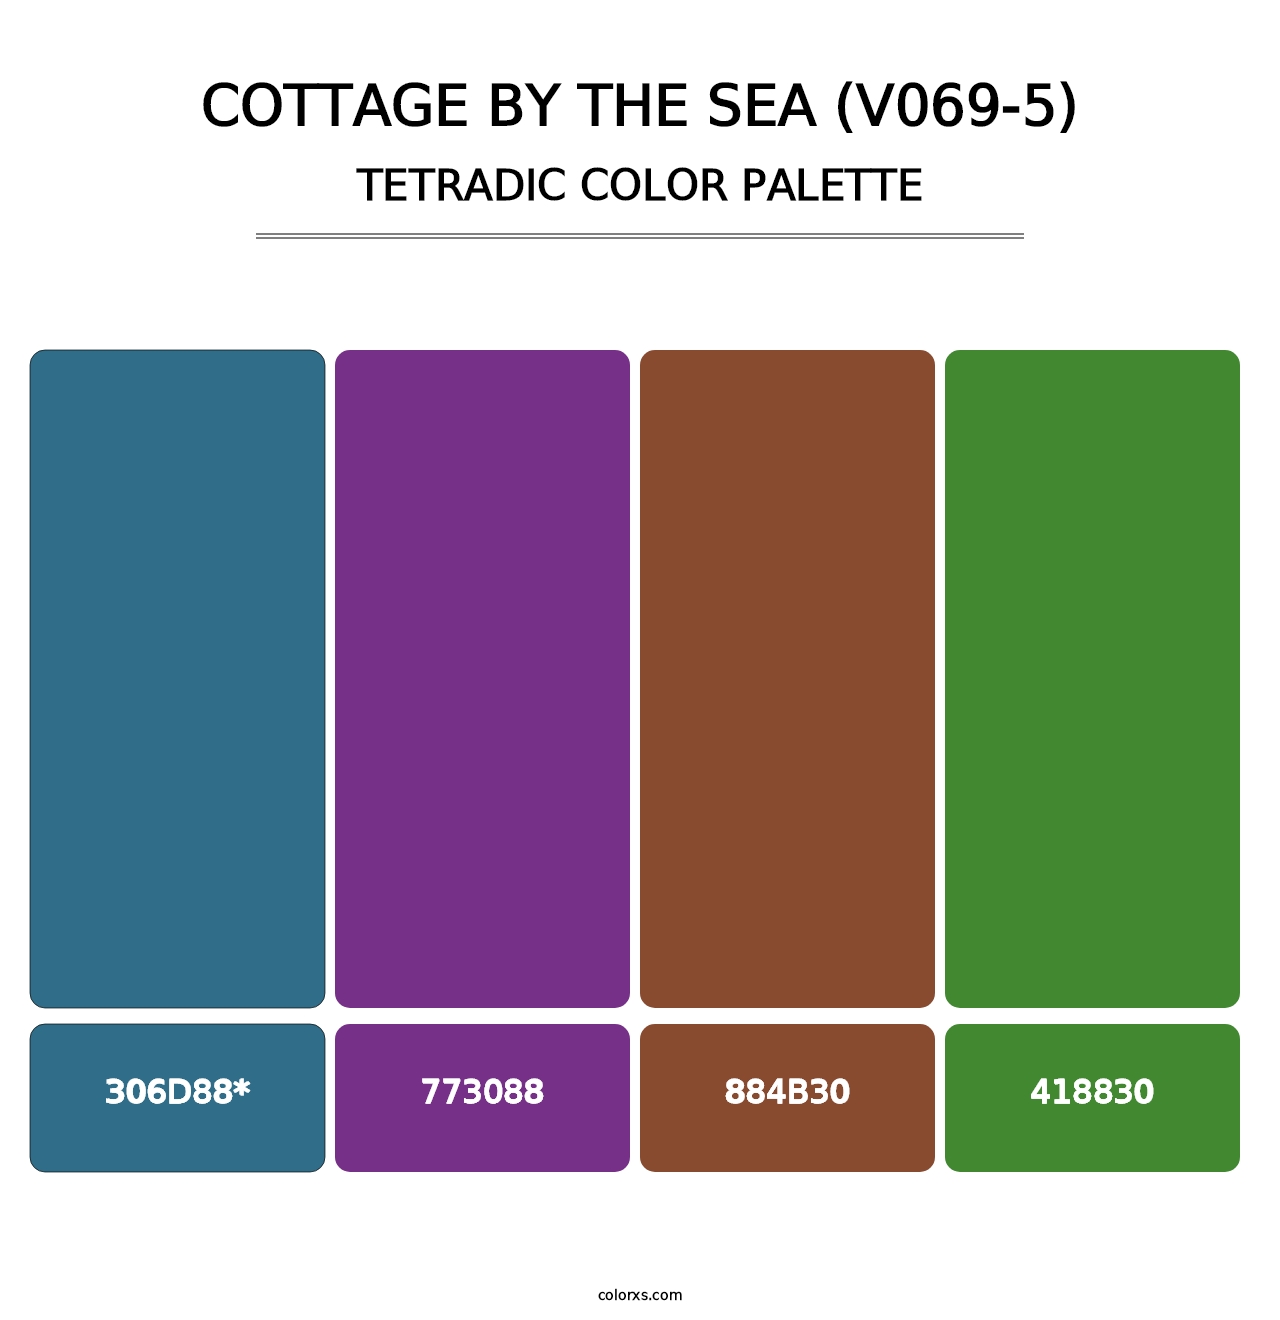 Cottage by the Sea (V069-5) - Tetradic Color Palette